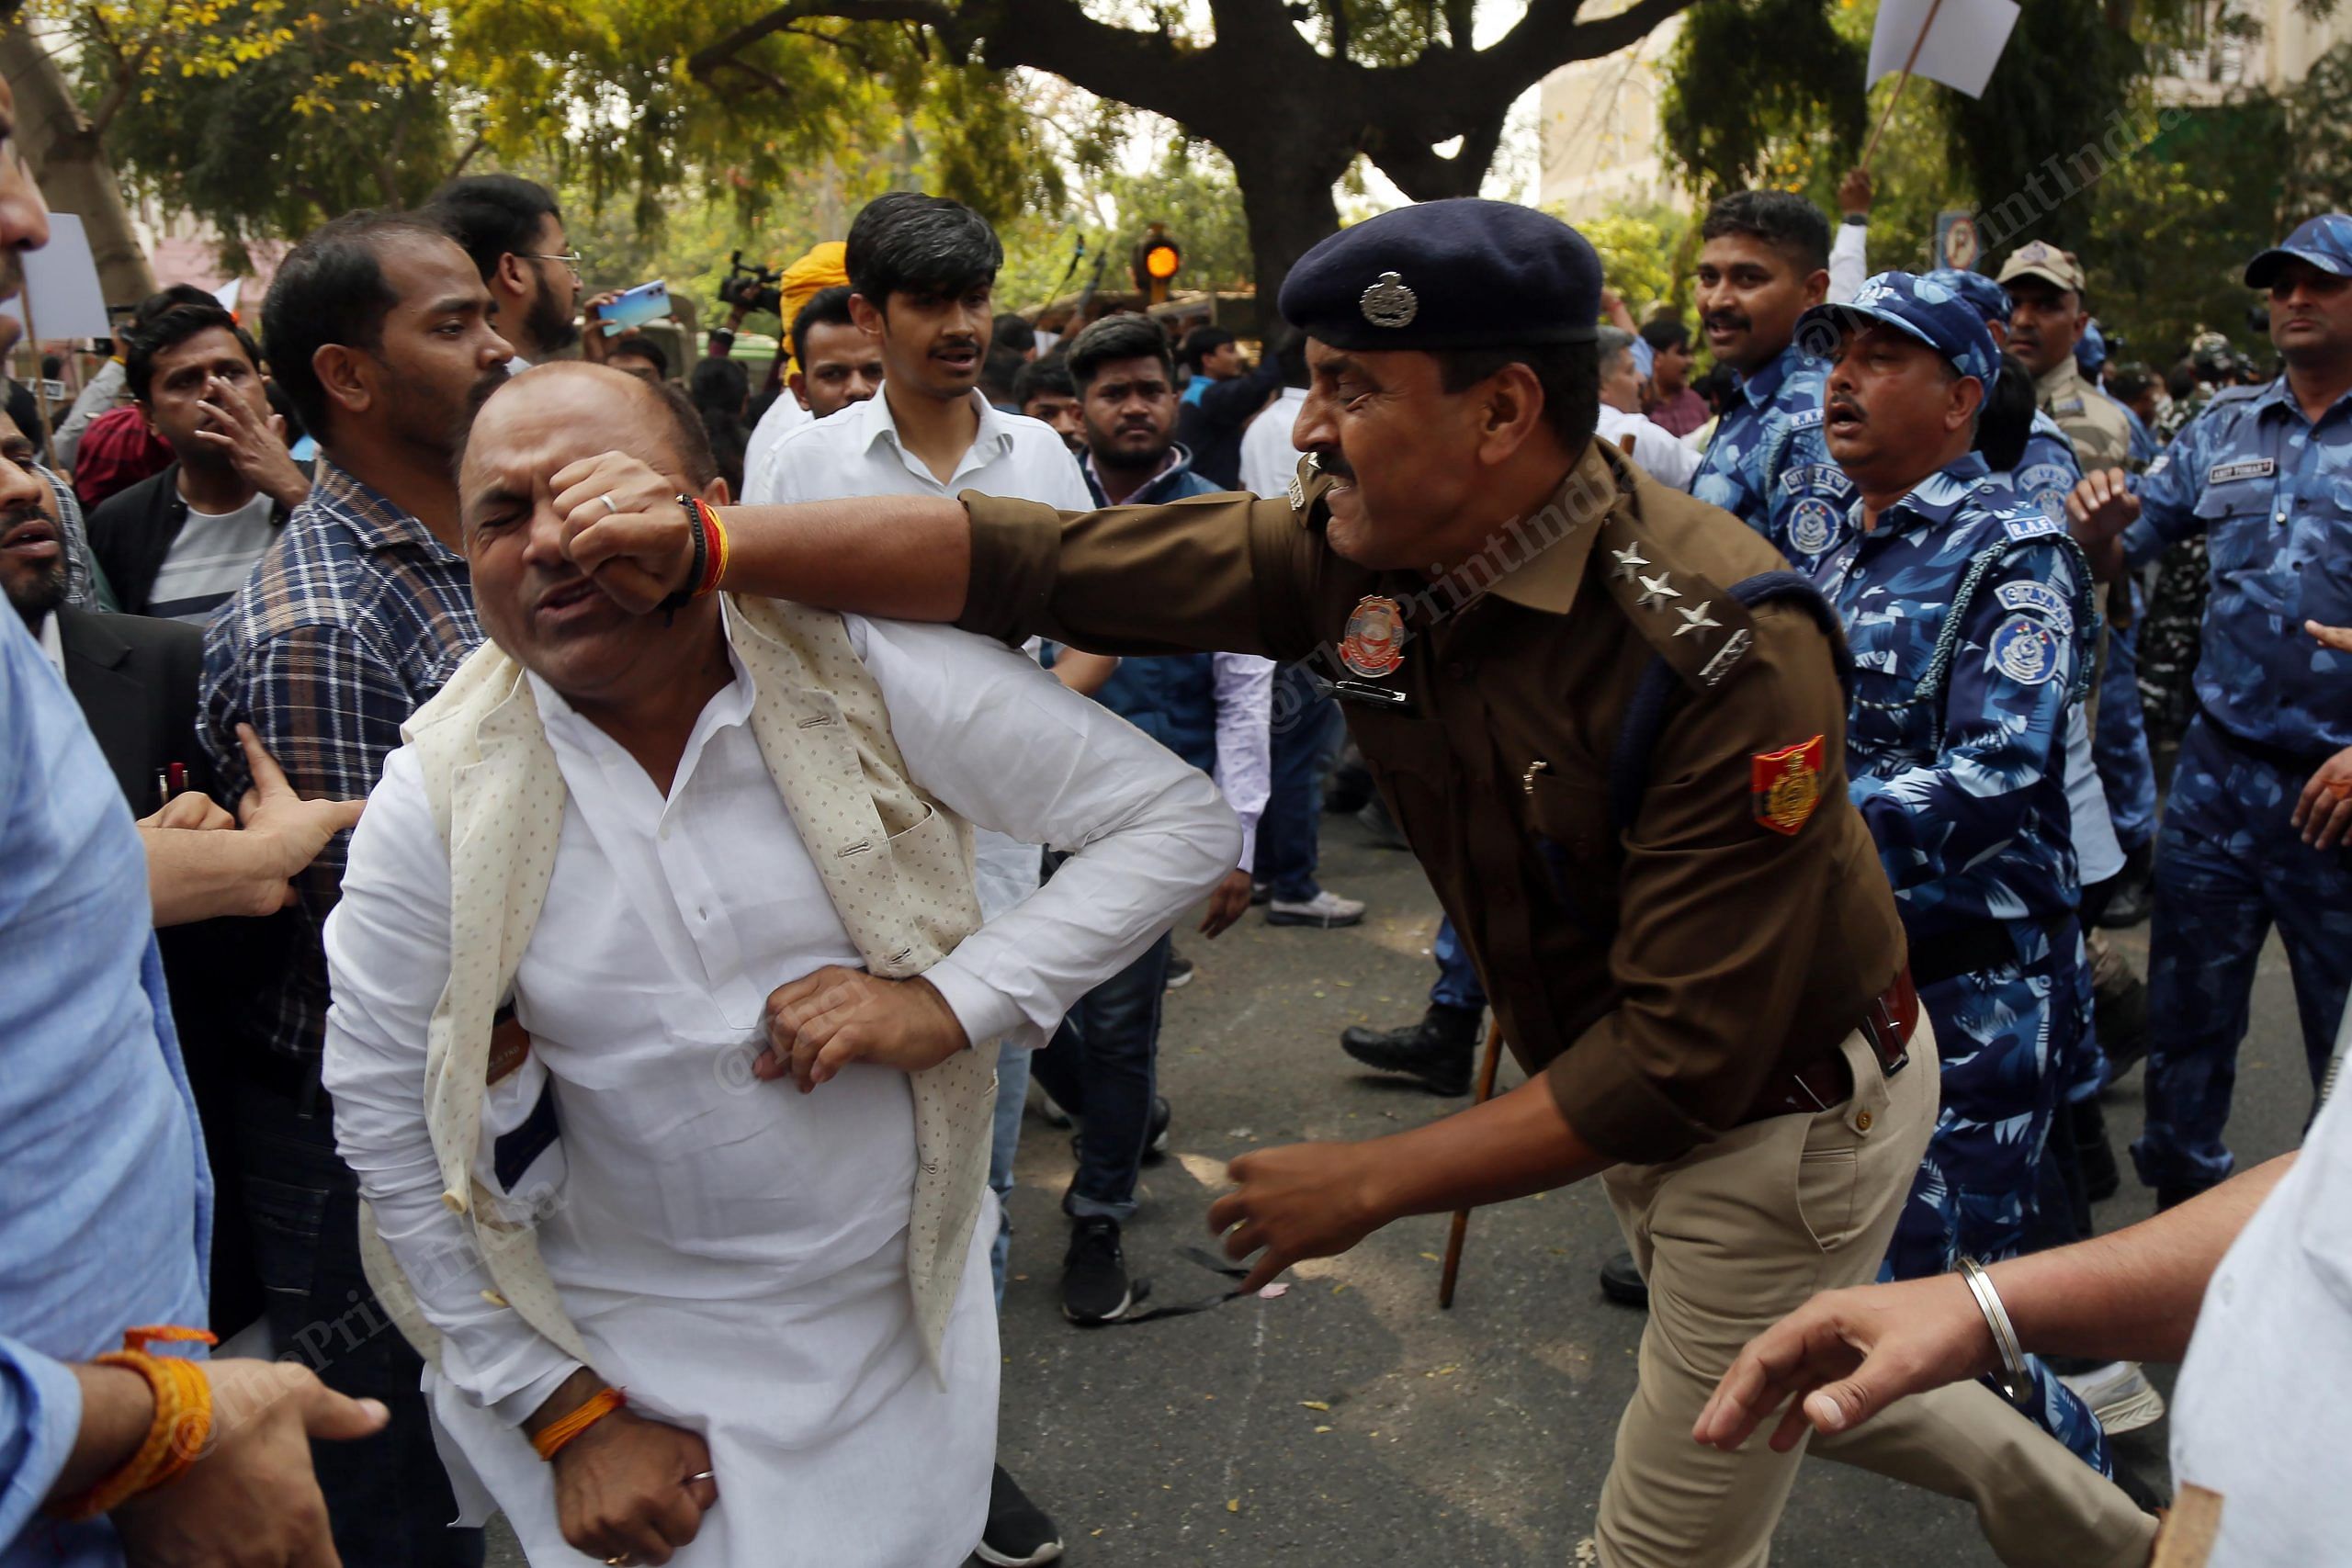 The moment when a Delhi Police officer lost his cool. Captured during an Aam Aadmi Party protest in Delhi this year over the arrest of party leader and former Delhi Deputy Chief Minister Manish Sisodia, this photo of a cop punching a protestor symbolises for me how the police and the public often end up at odds with each other | Photo: Suraj Singh Bisht | ThePrint